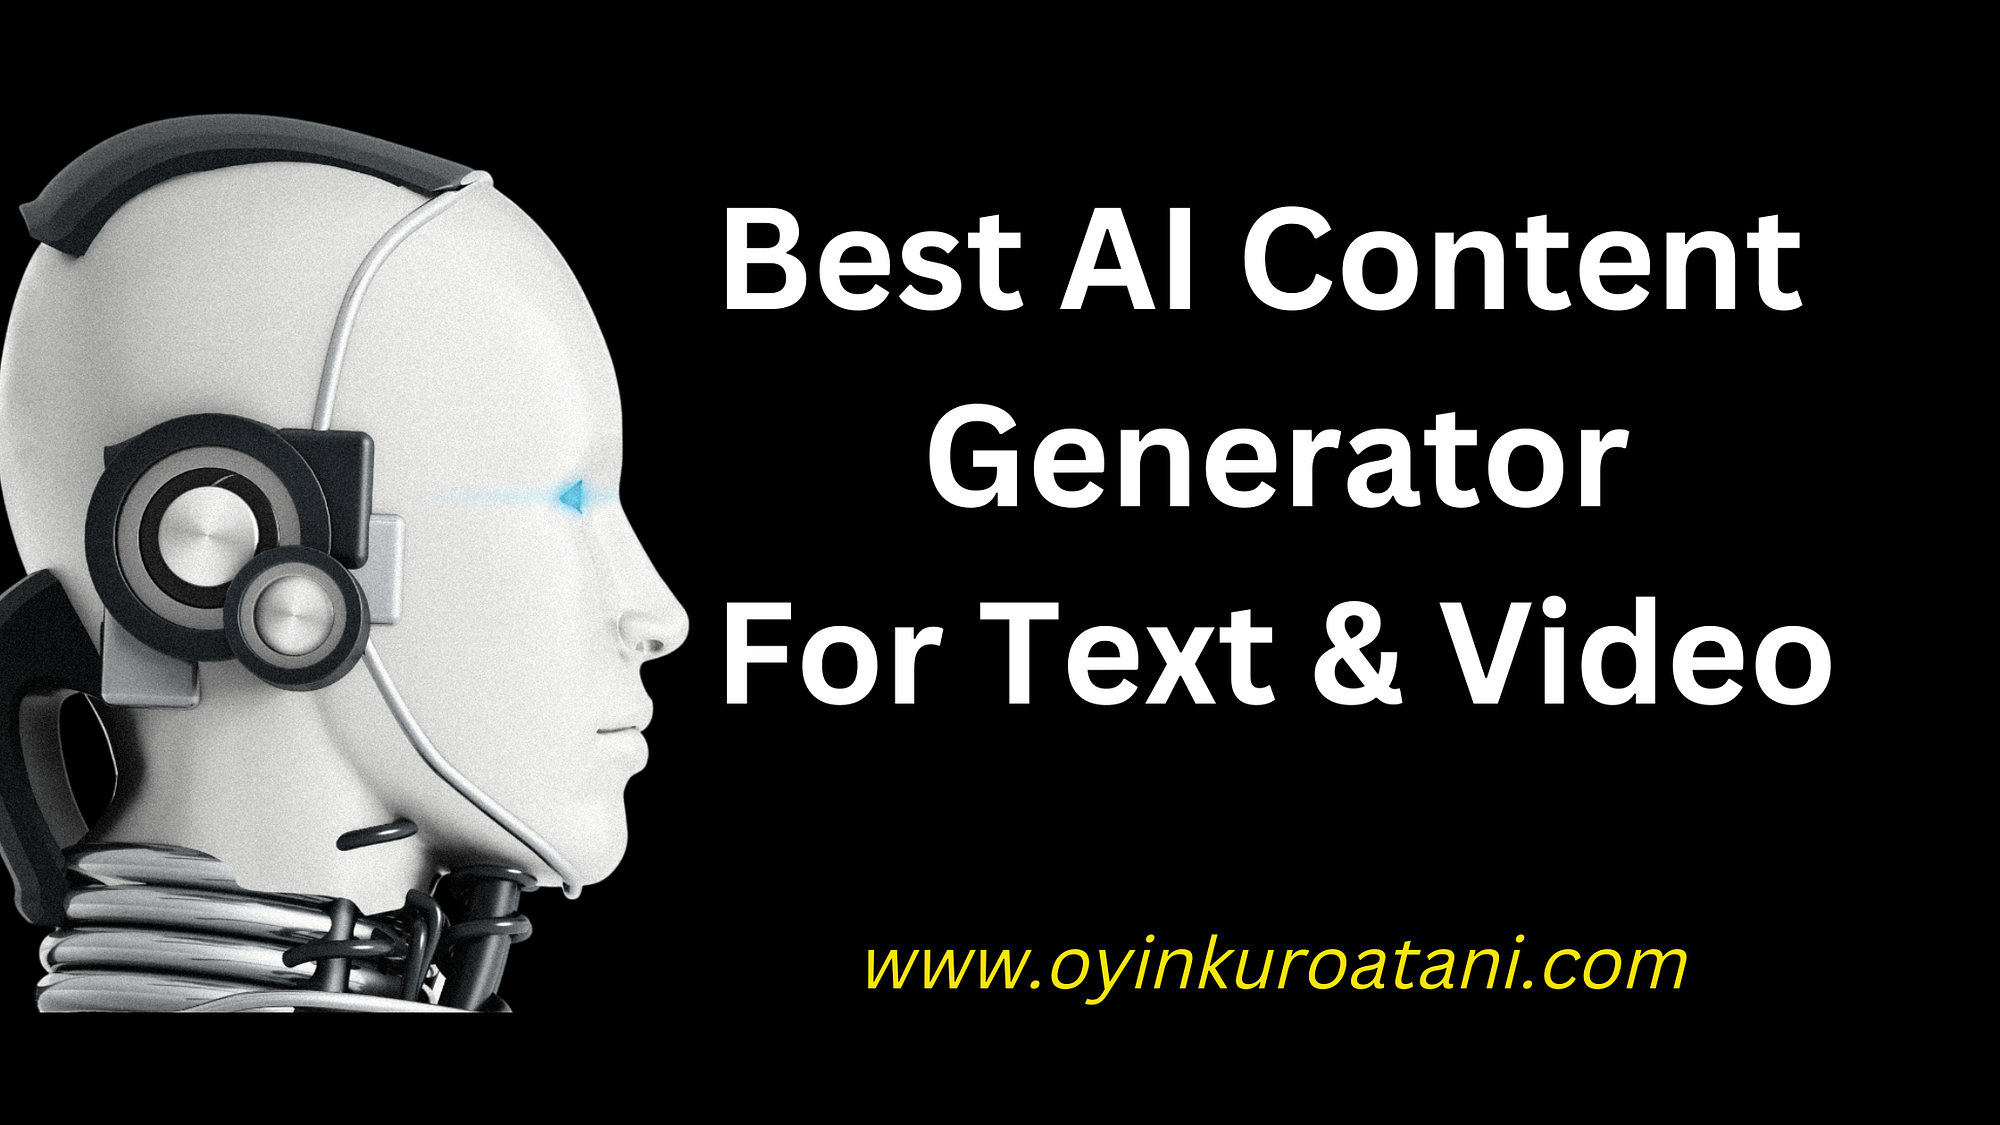 Best AI Content Generator For Text & Video